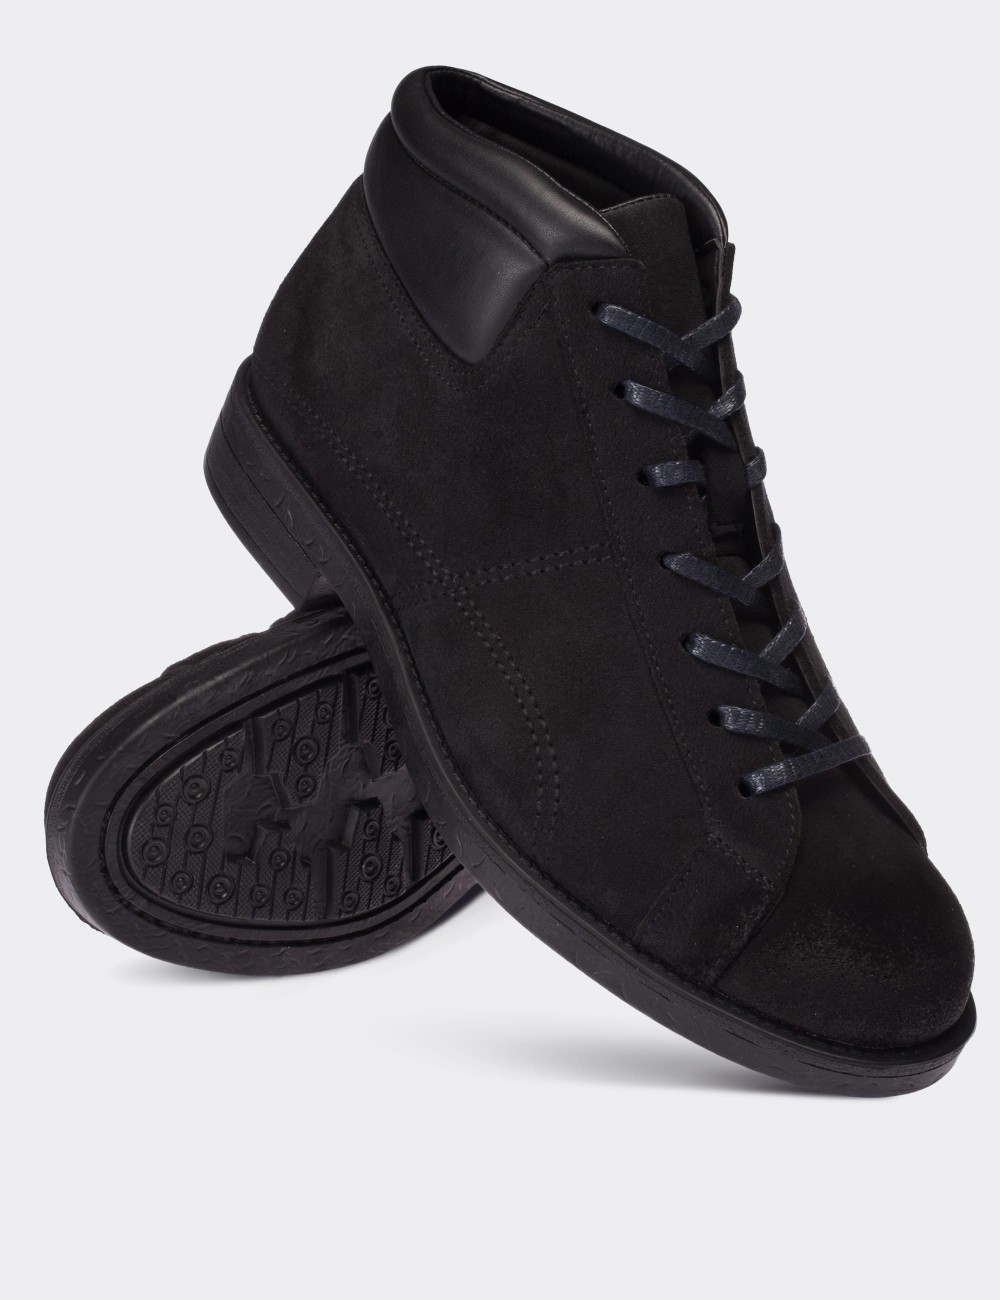 Black Suede Leather  Boots - 01760MSYHC03